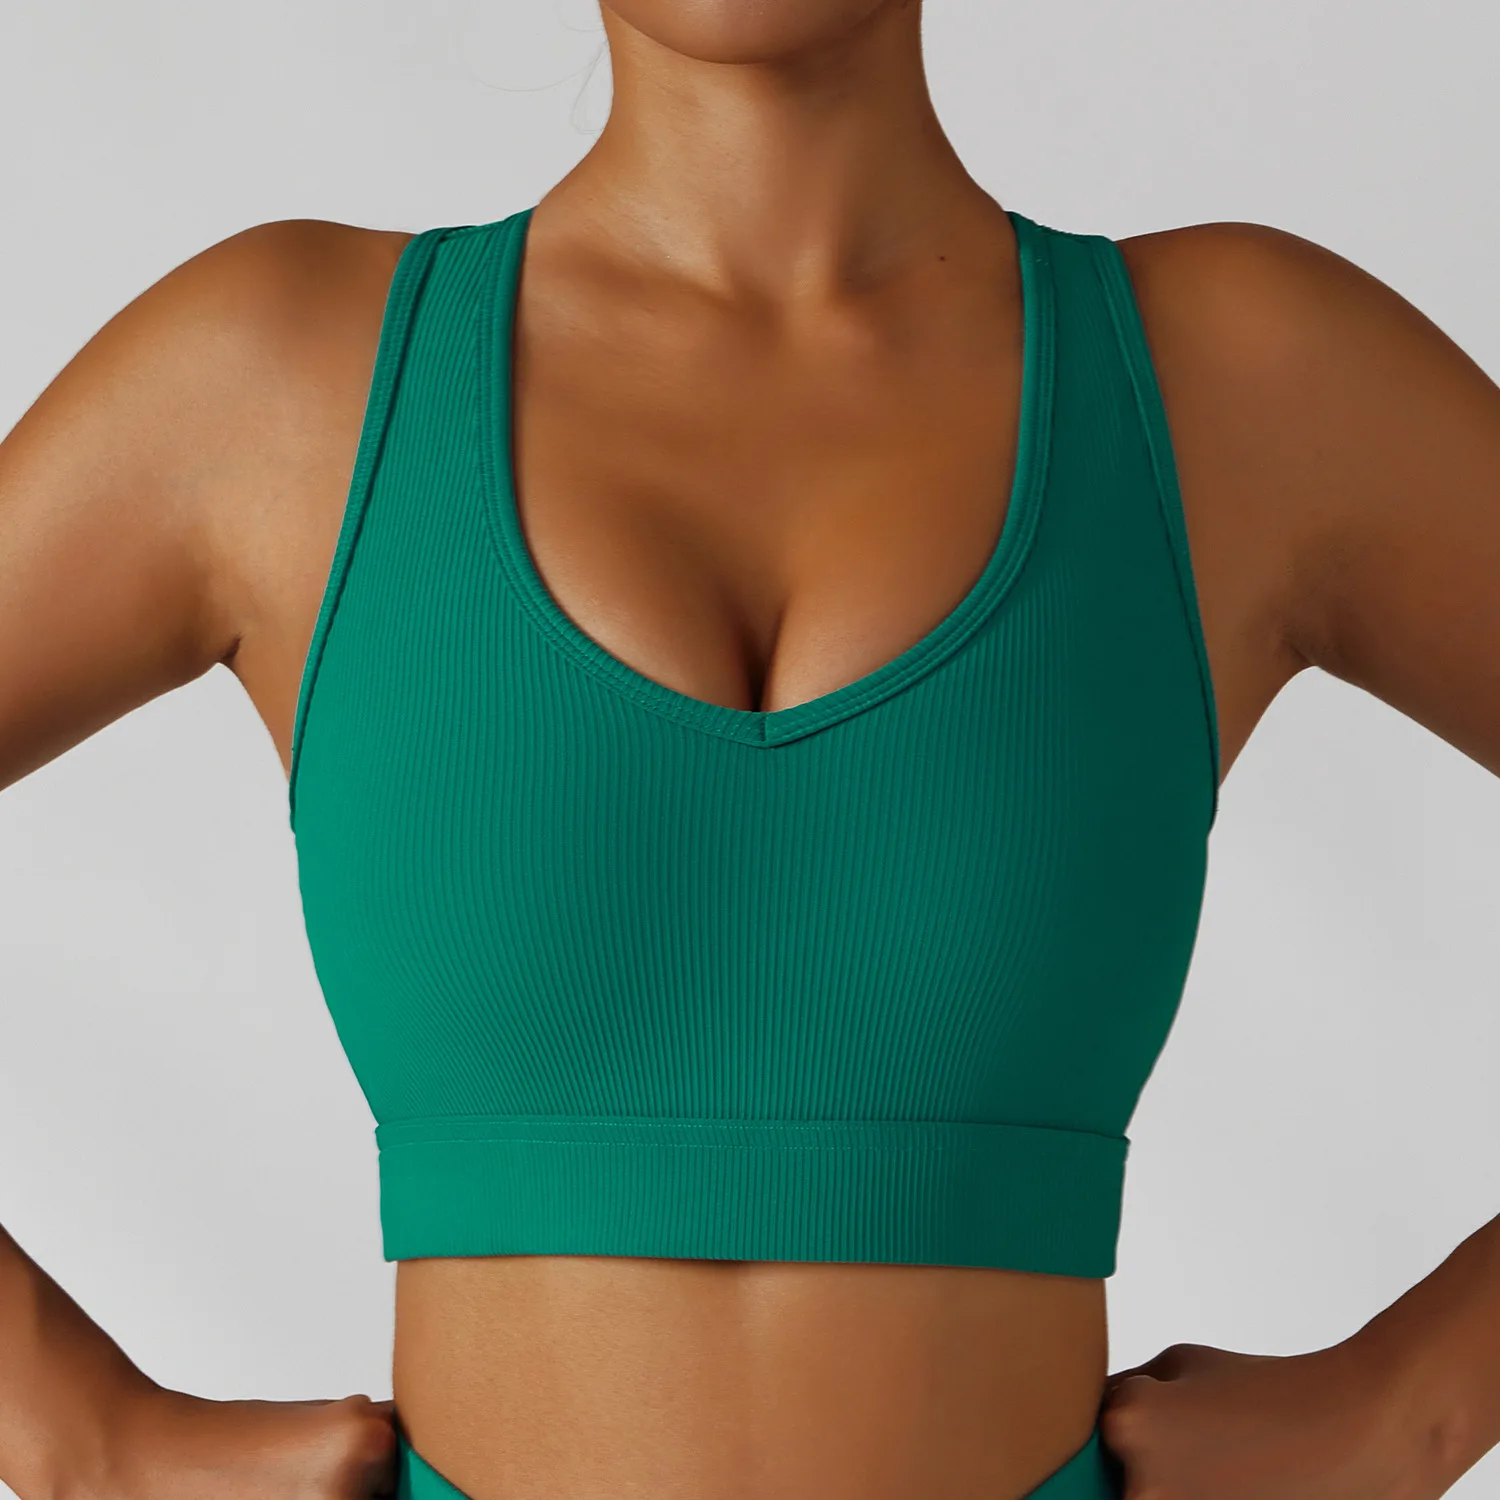 Hot Sale Deep V Sexy Yoga Tops Racer Back Quick Dry Workout Tank Tops Breathable High Stretchy Sport Bra Top Fitness